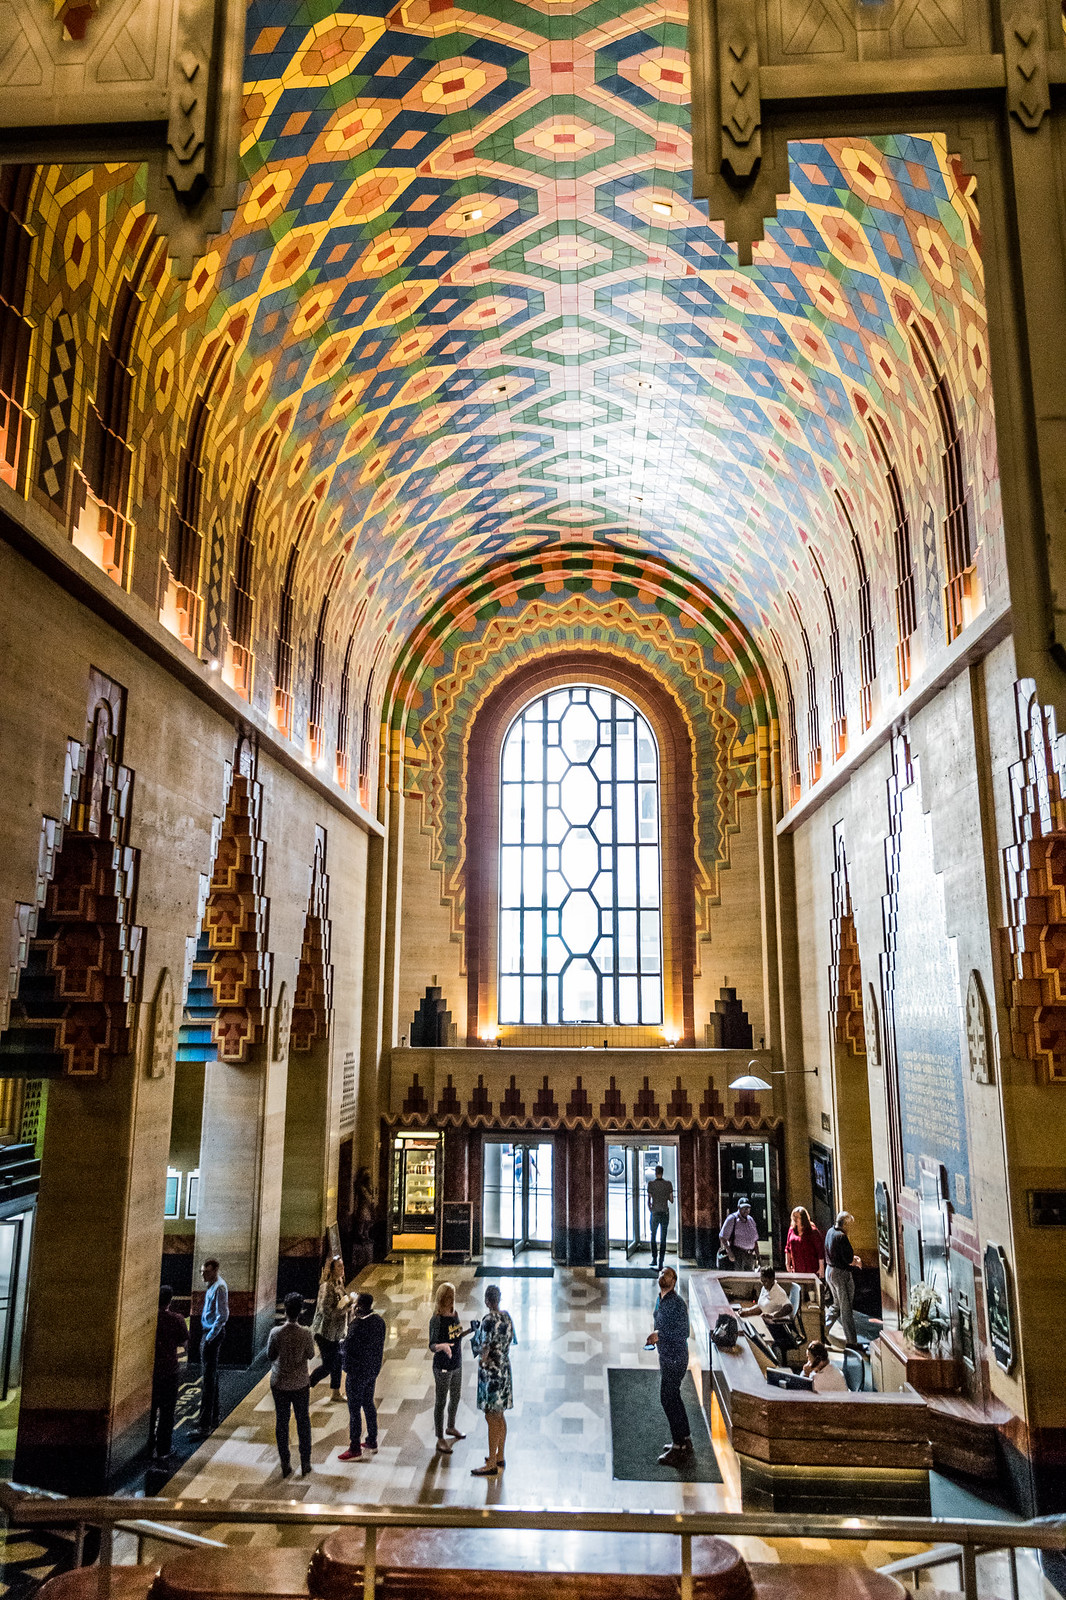 a colorful art-deco masterpiece, and definitely worth seeing in person!